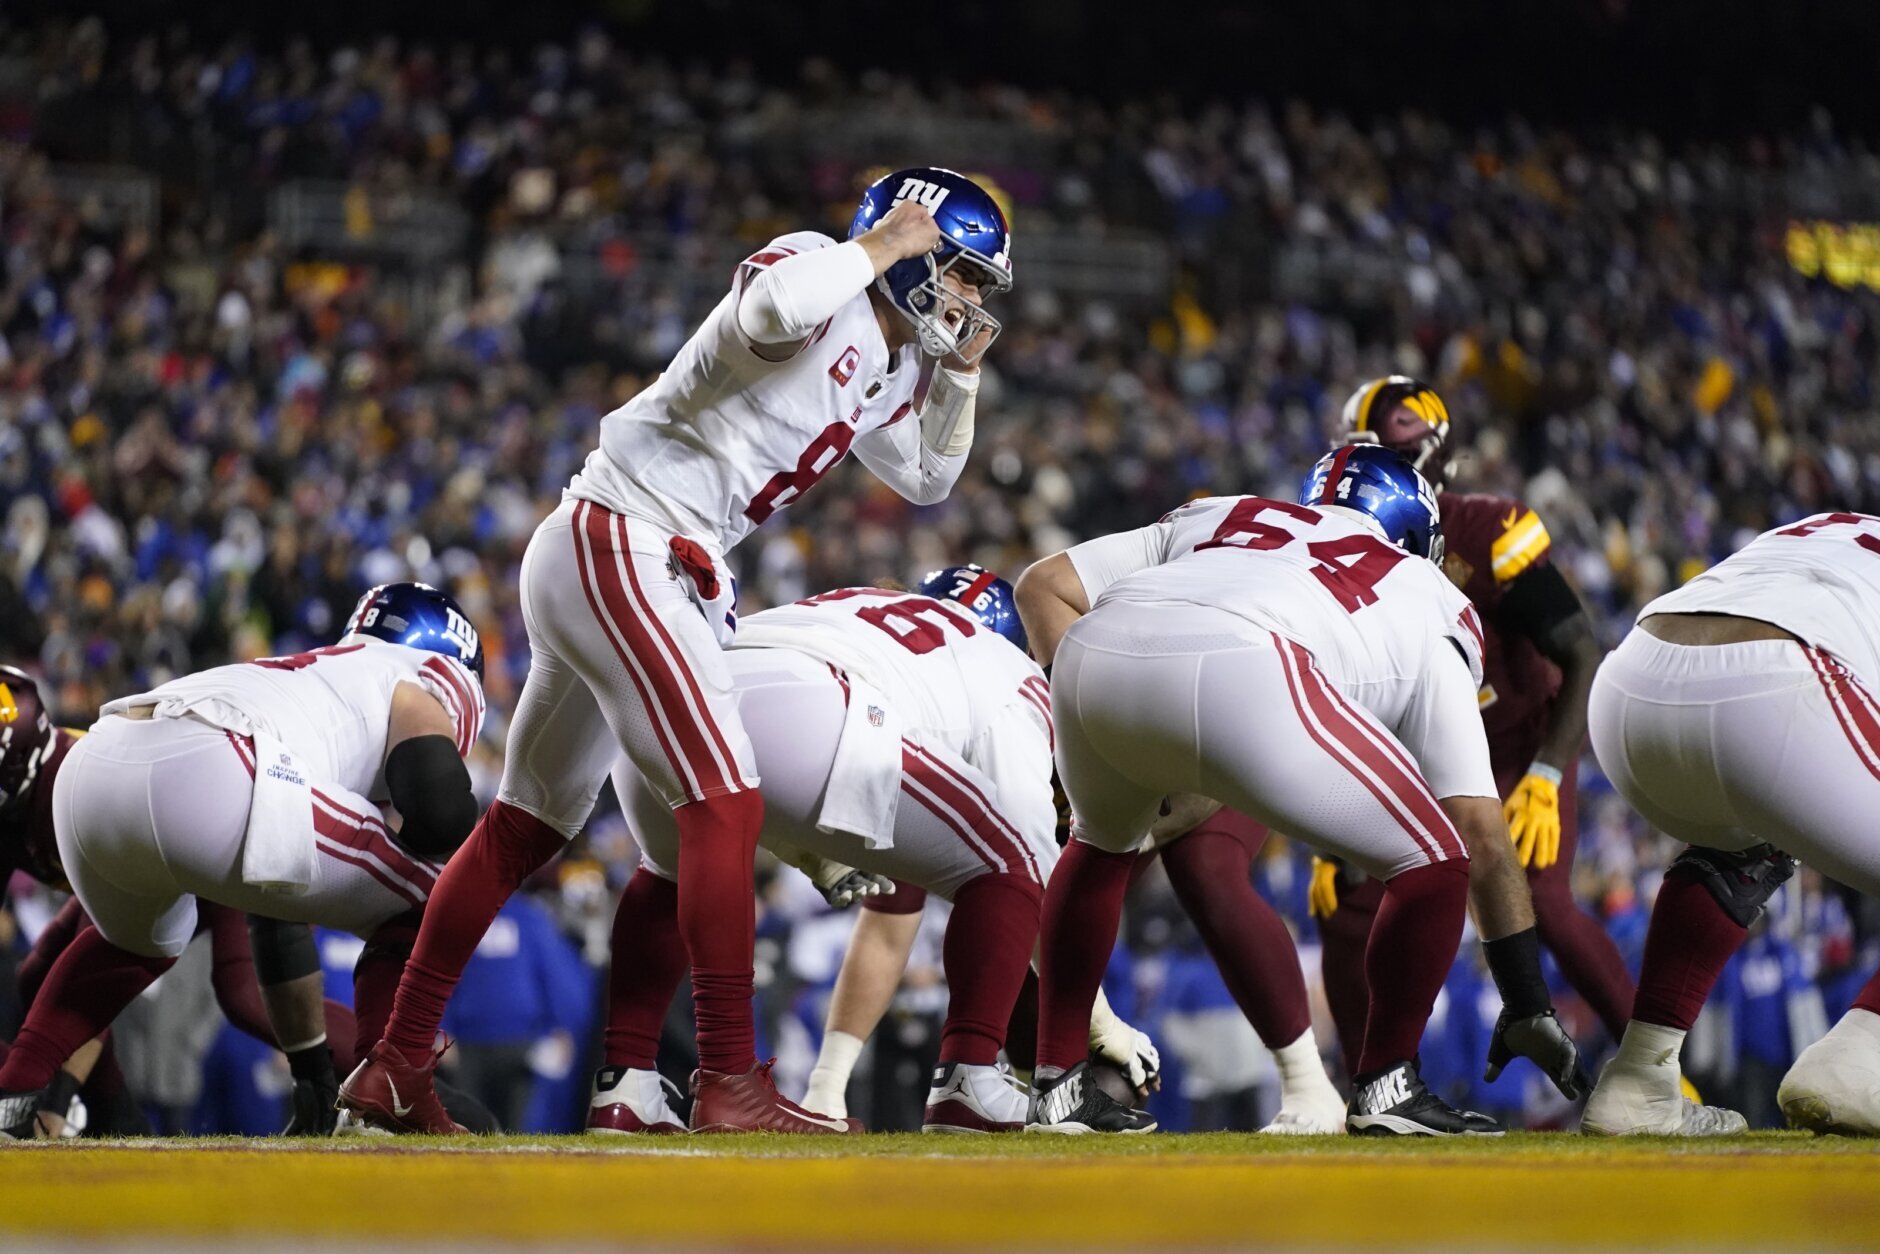 Giants beat Commanders in prime time to end winless skid